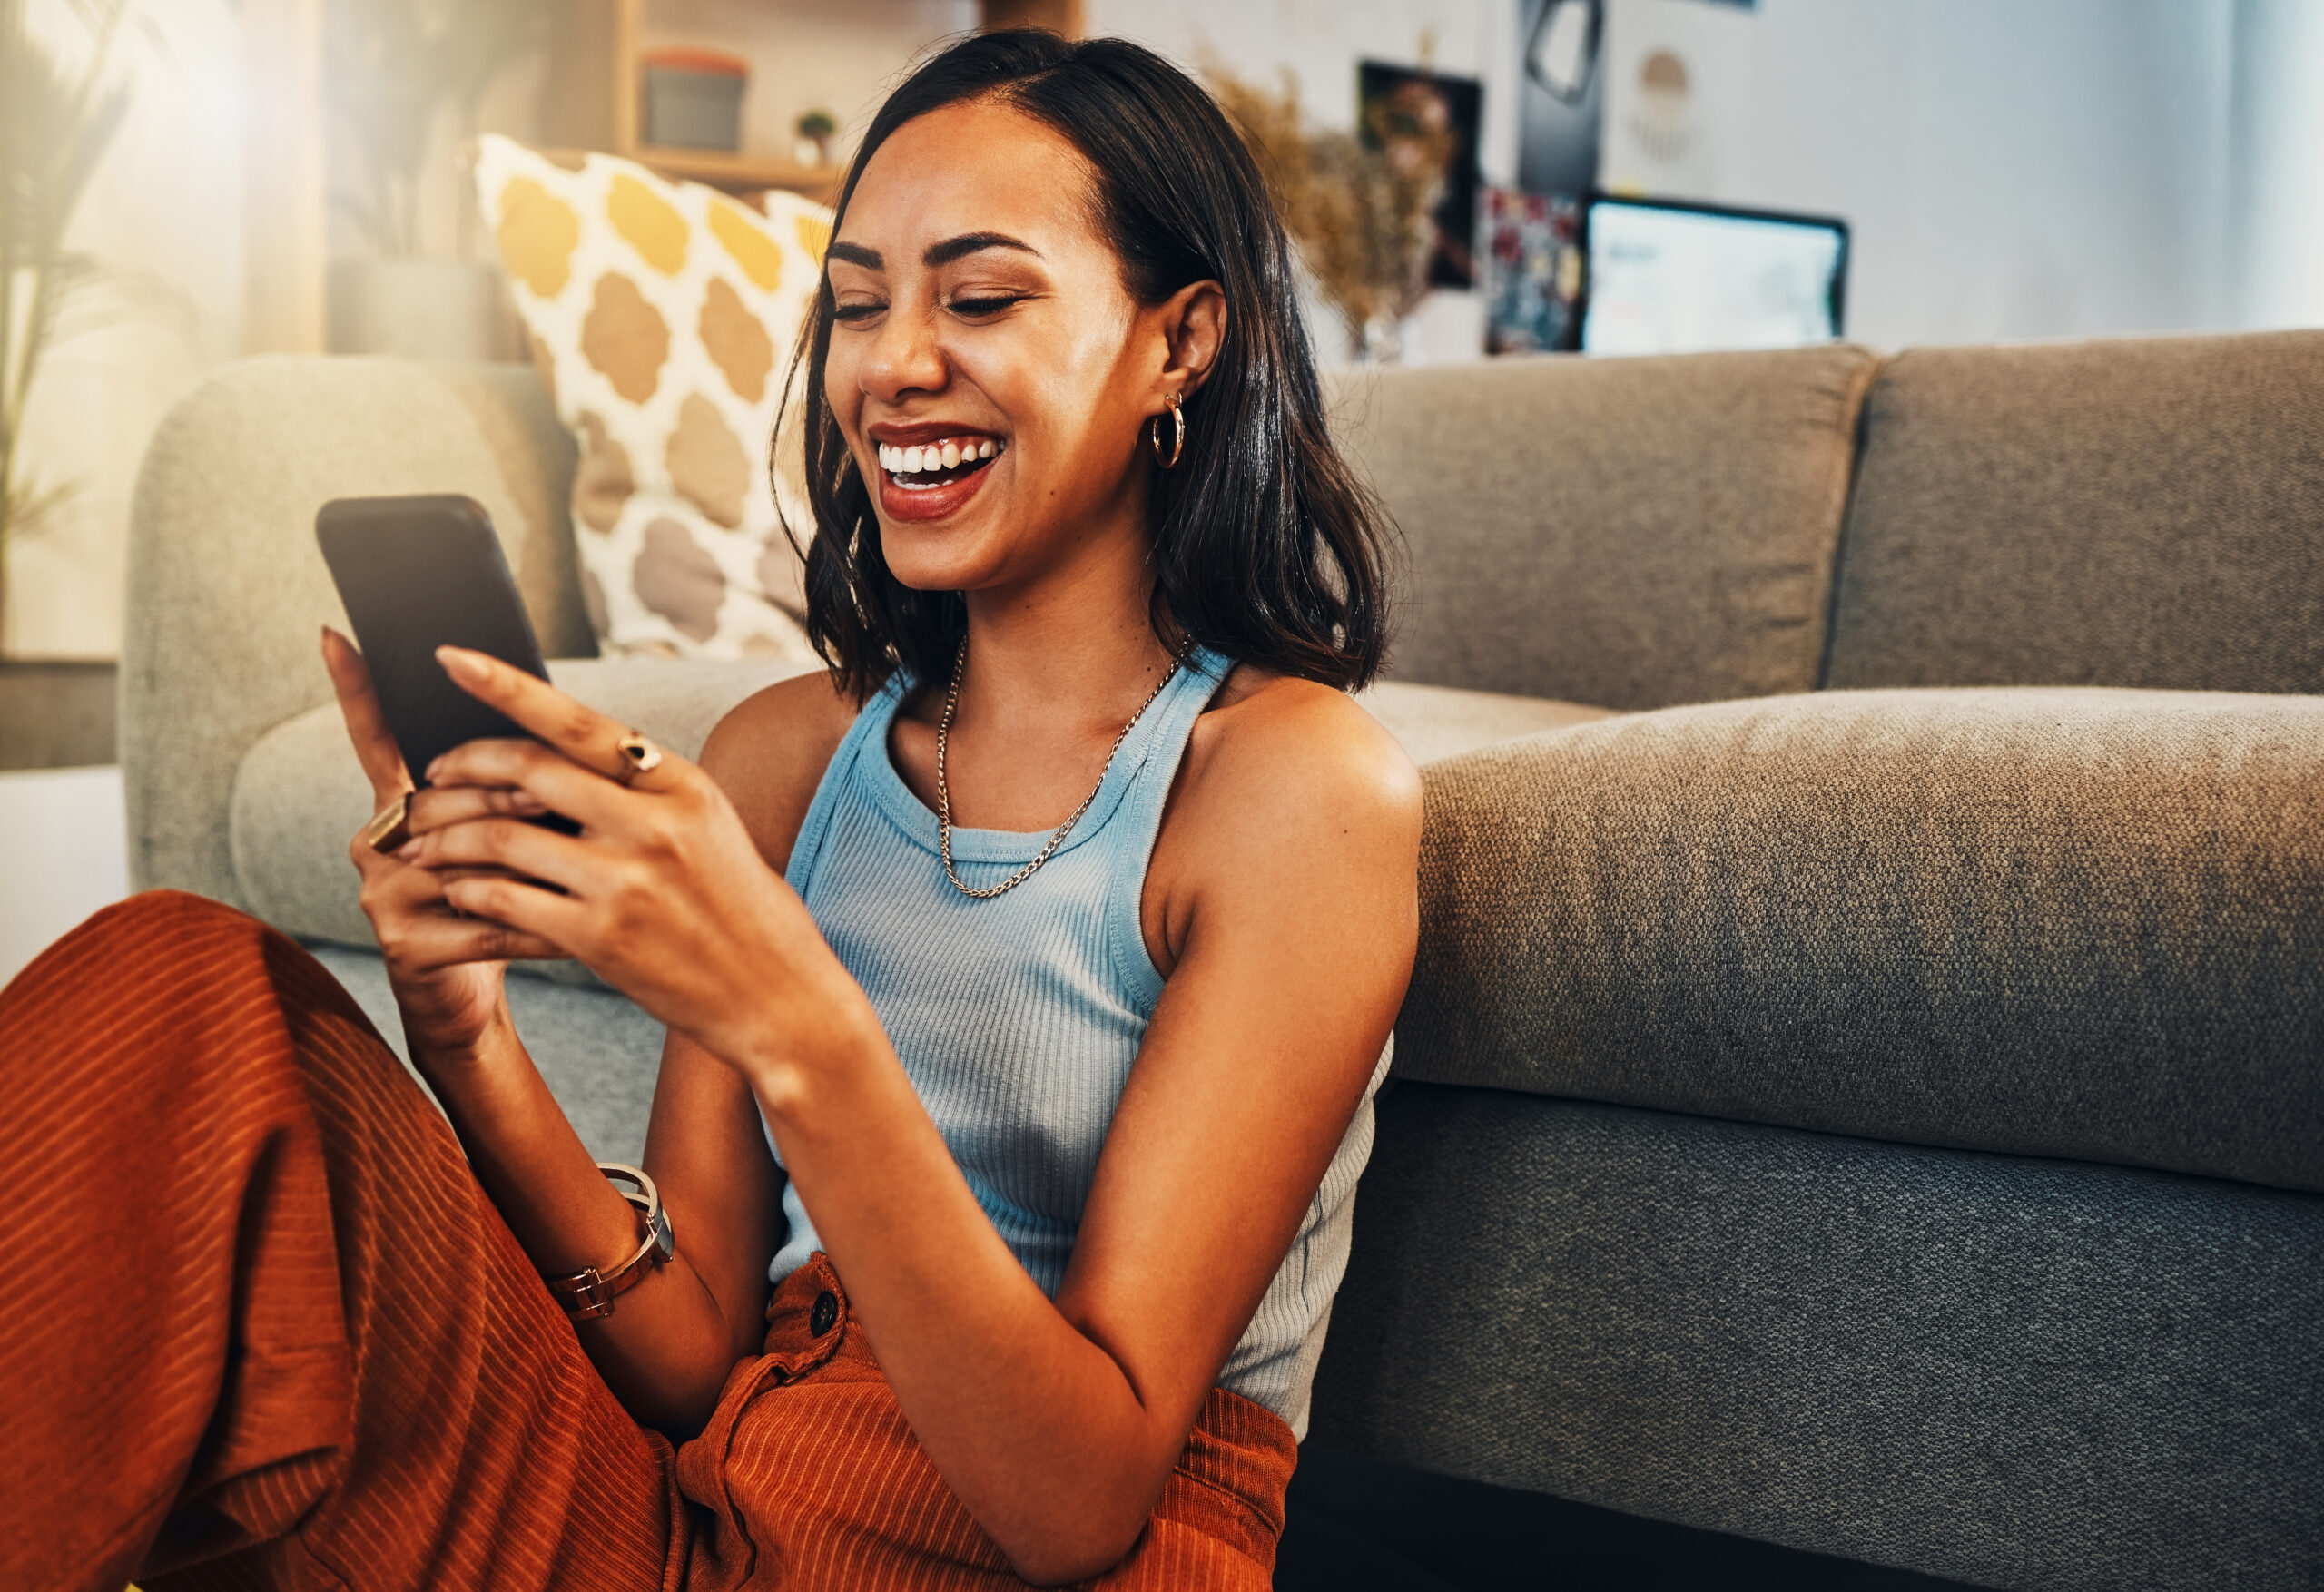 Young woman sitting on the floor in front of couch smiling and looking at mobile phone